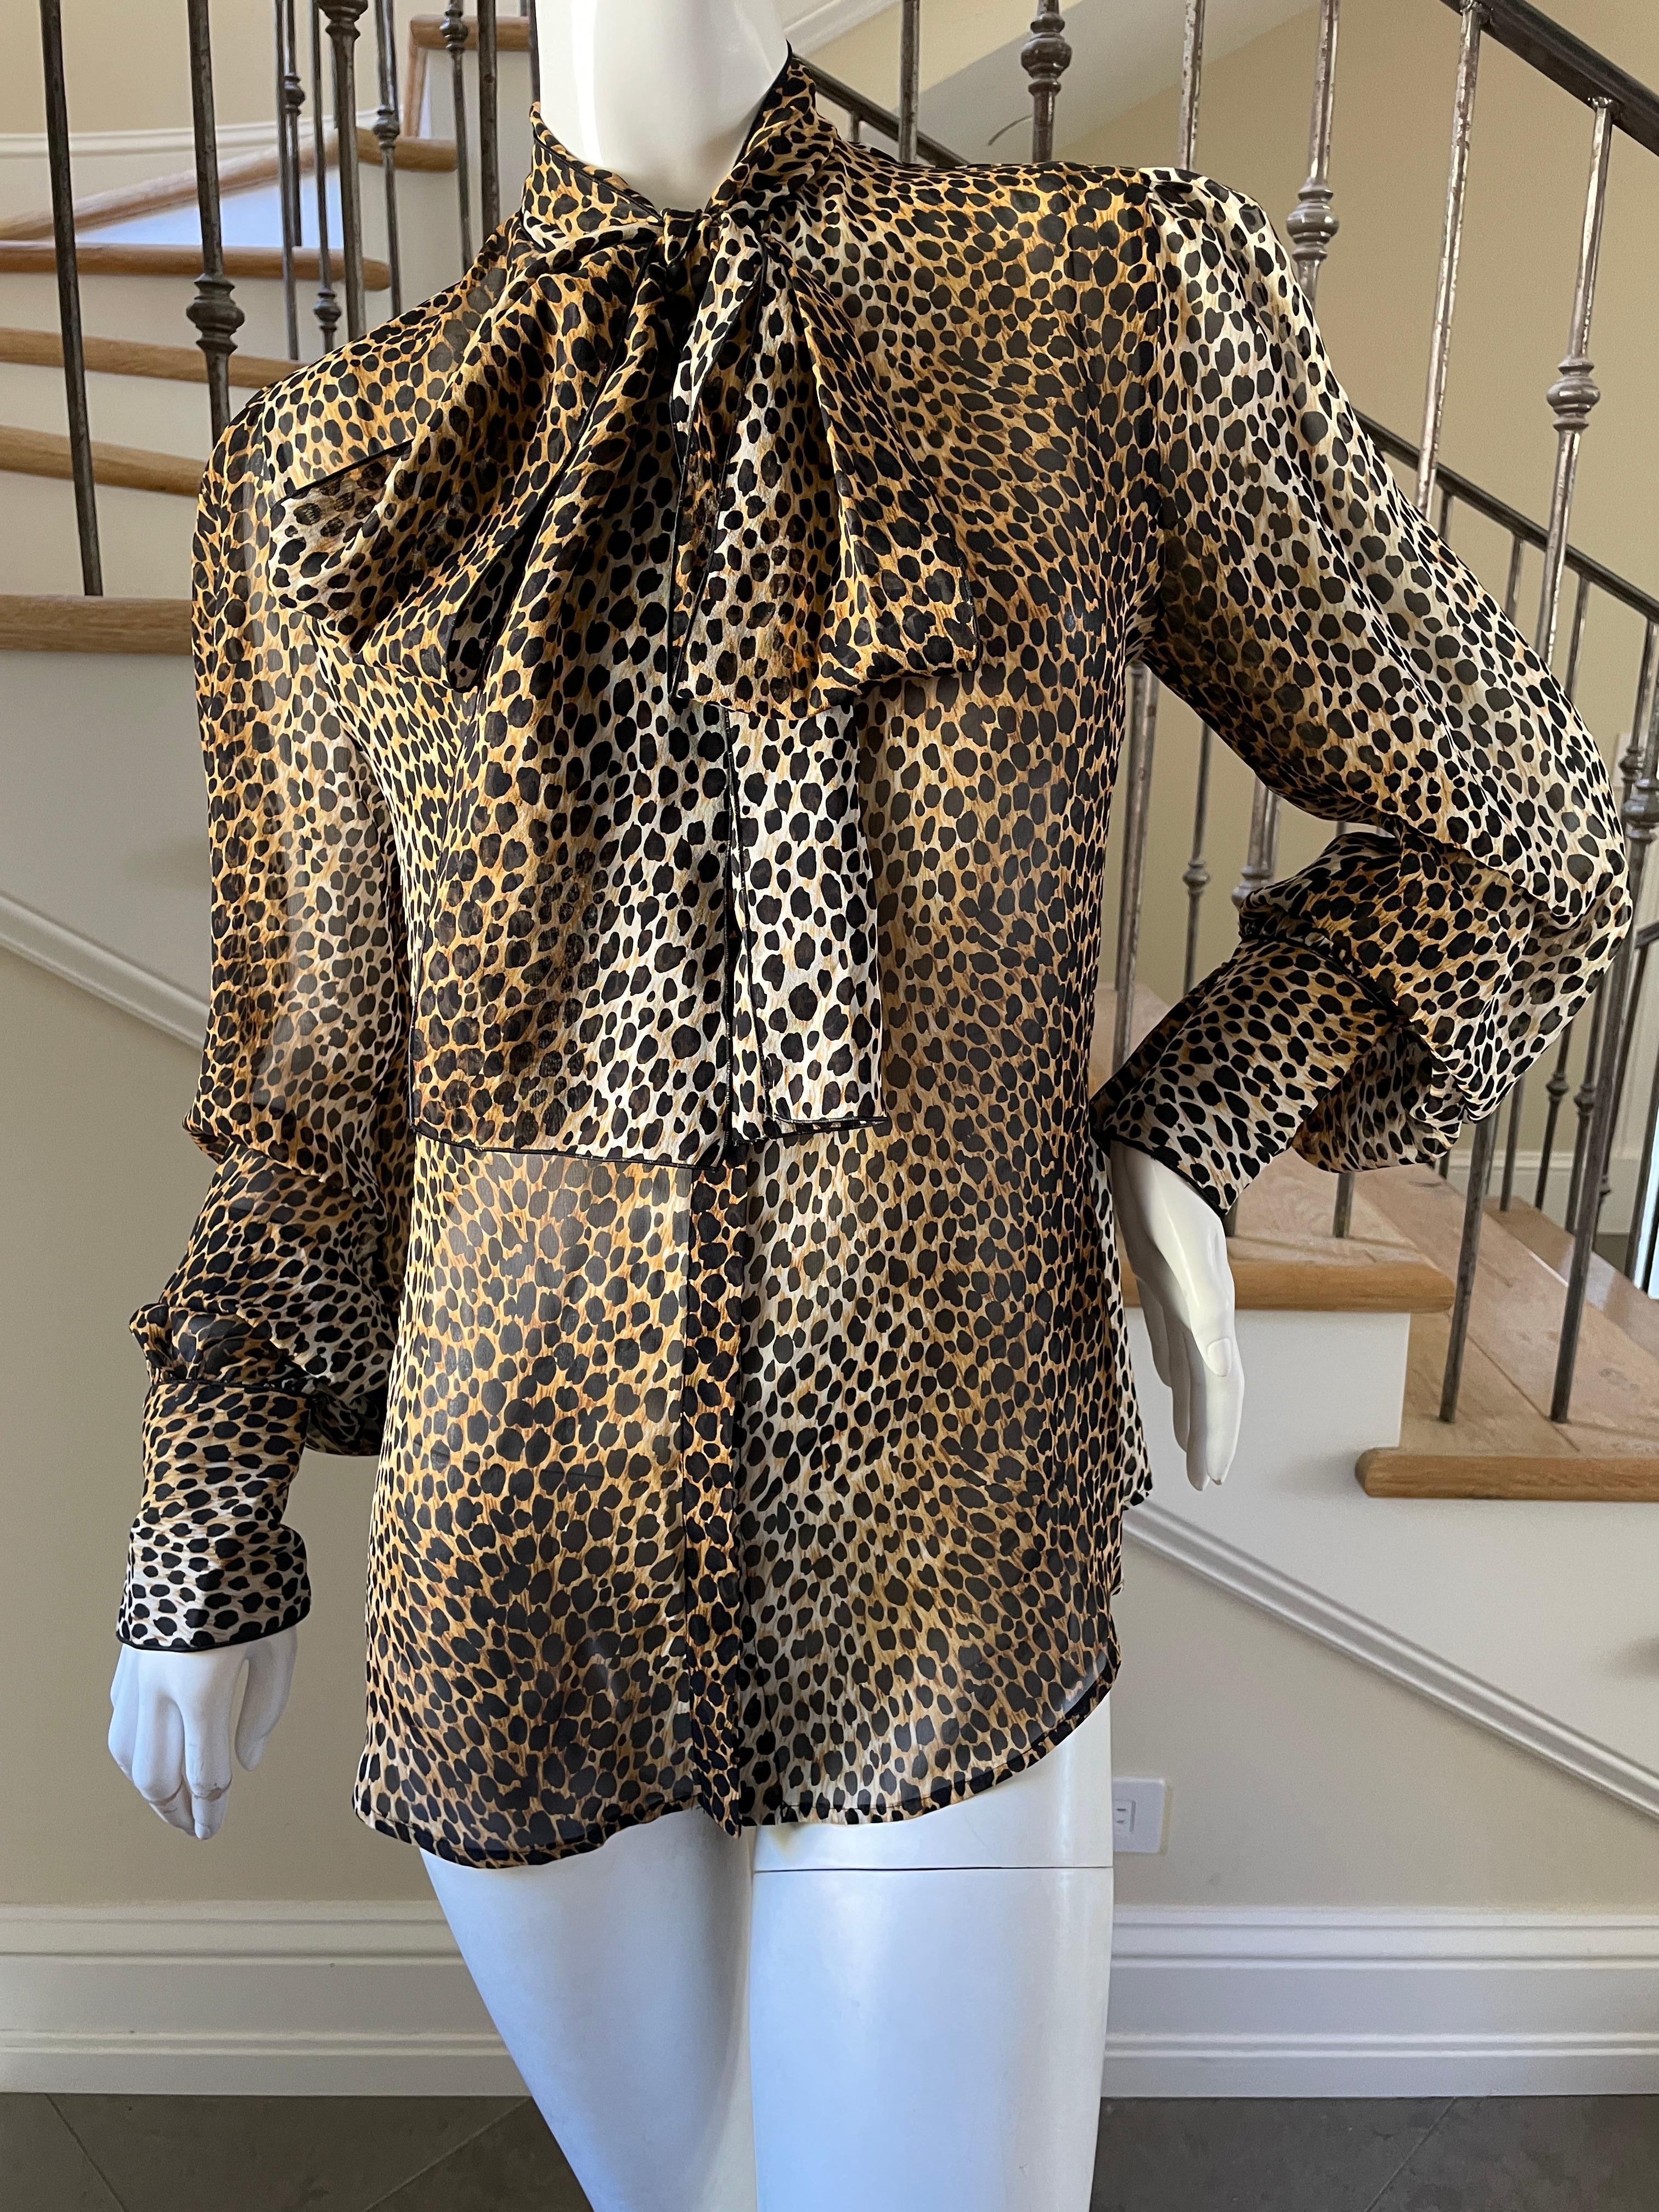 Dolce & Gabbana D&G Vintage Sheer Silk Leopard Print Blouse with Pussy Bow.
Size 40
Bust 36